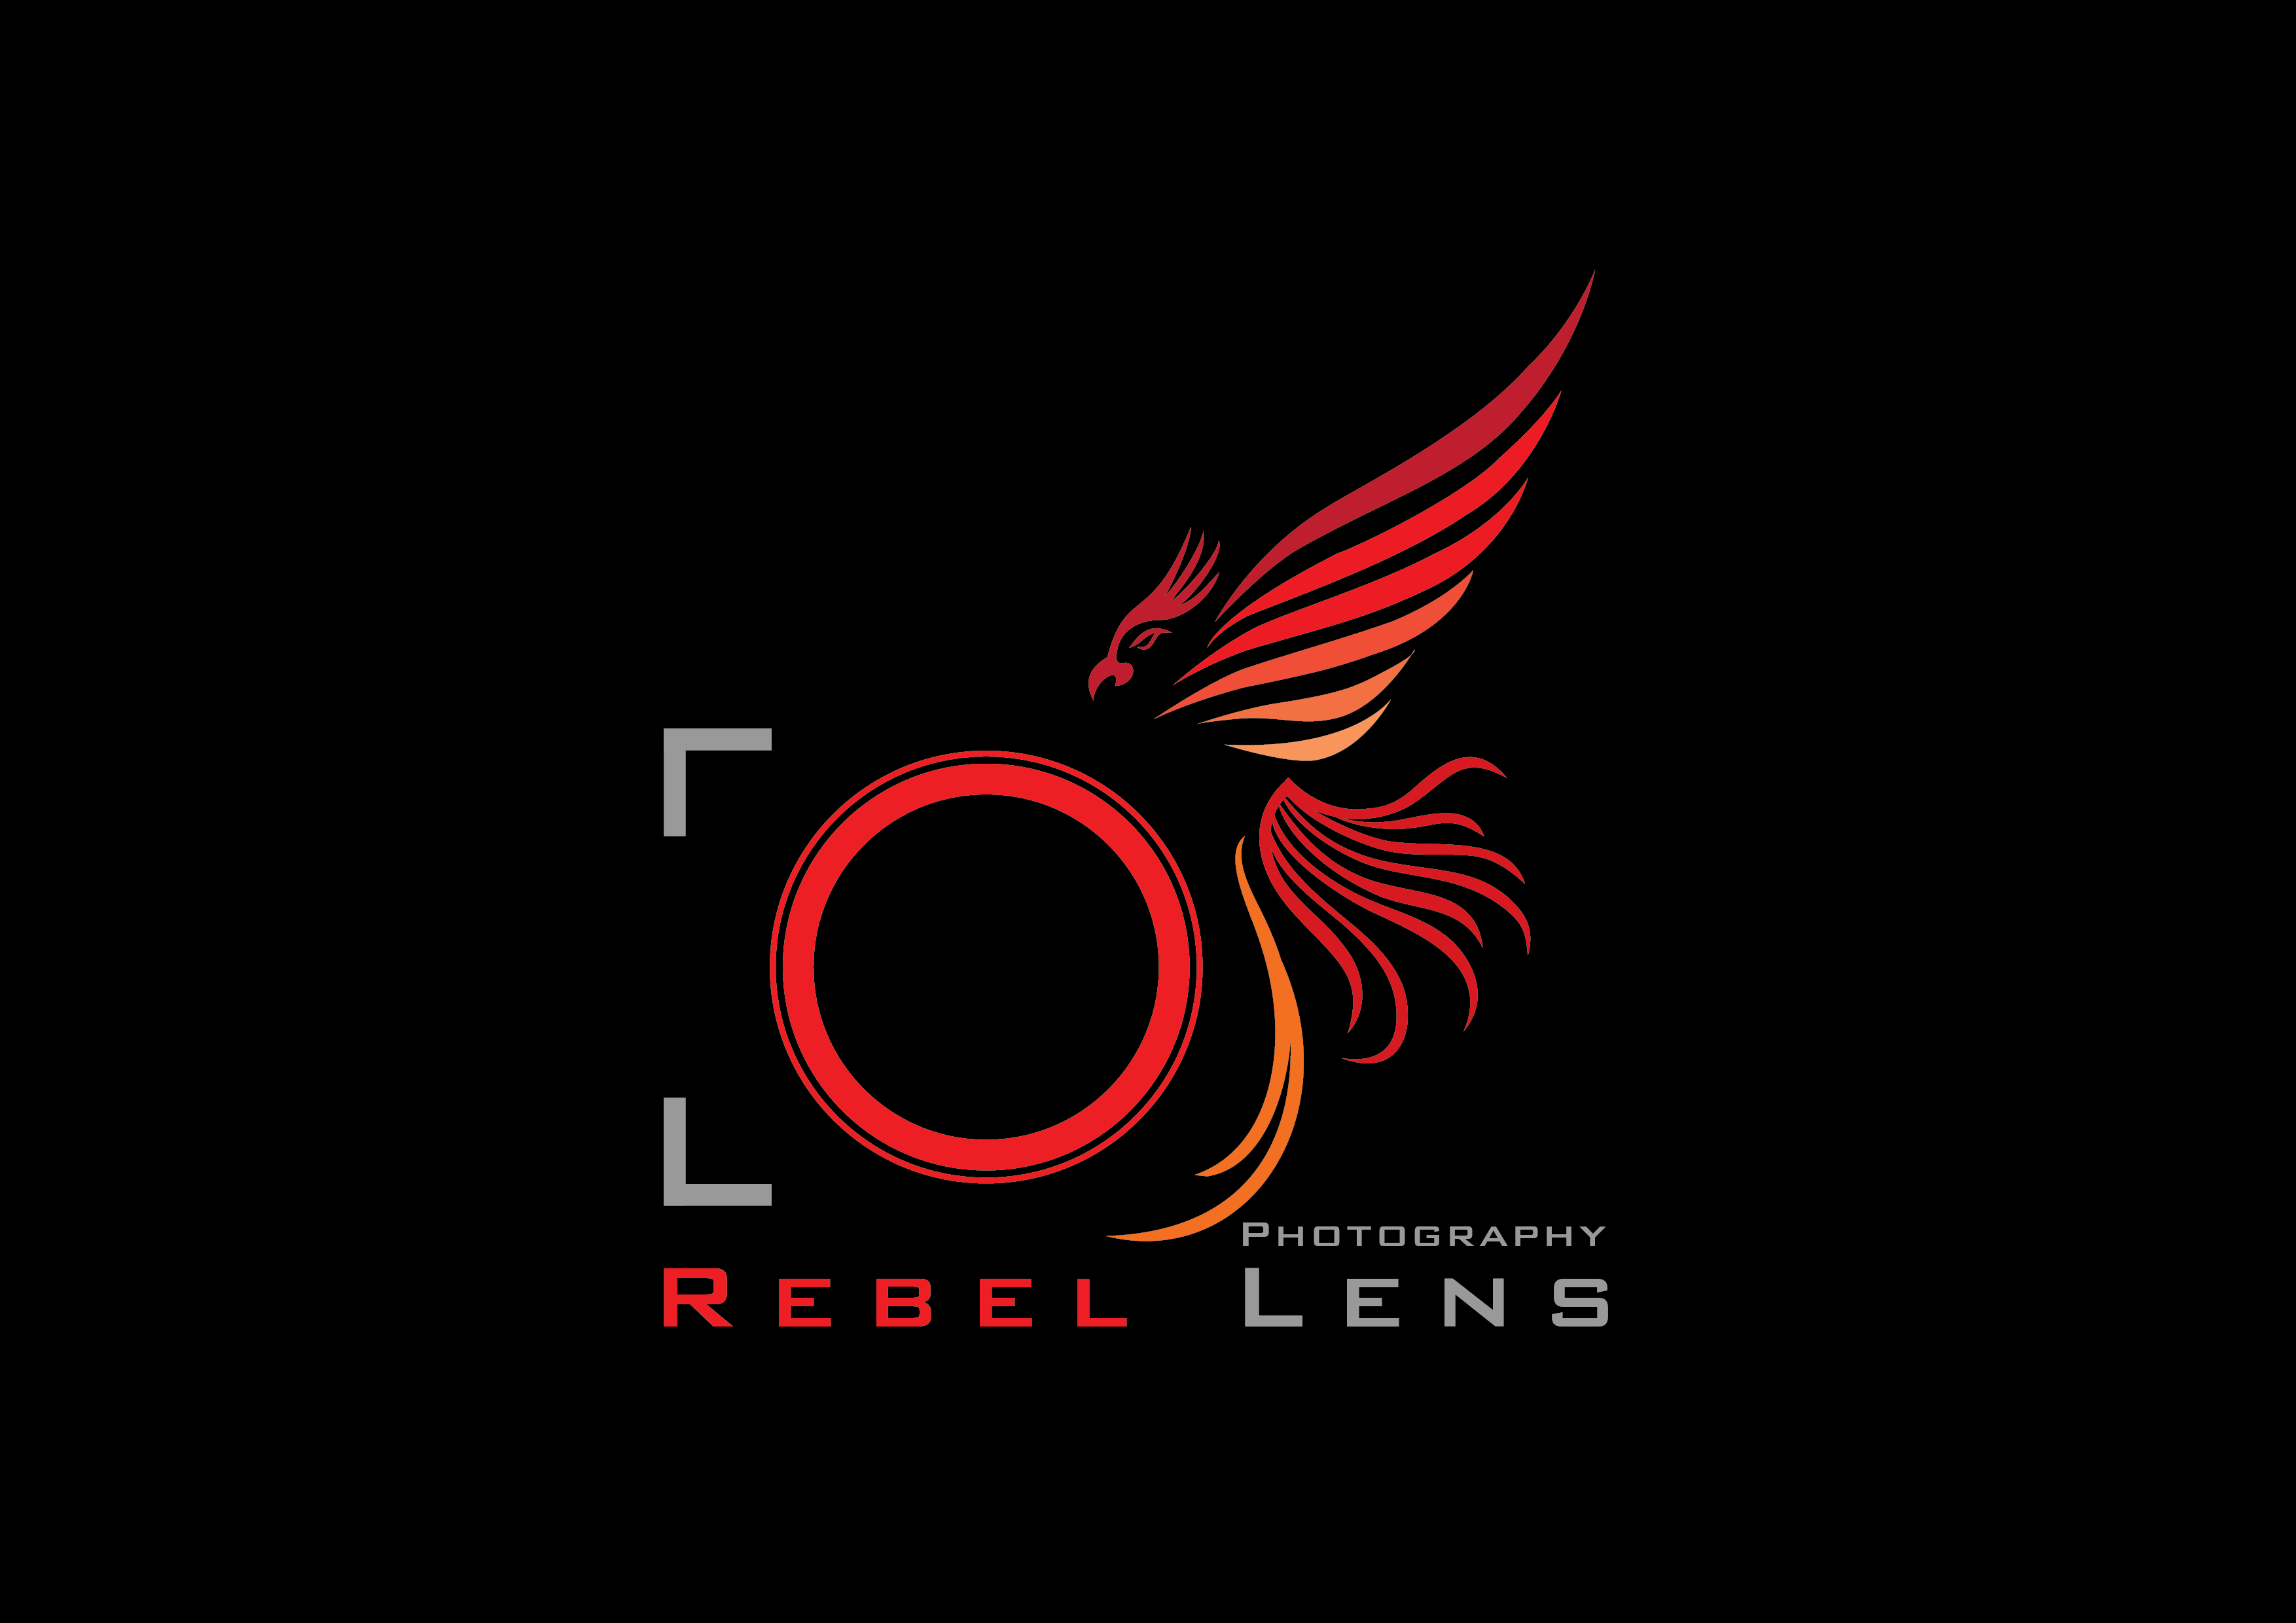 Red Photography Logo - Rebel Lens Photography Logo, Icon and Brand Identity Design | Bengin ...